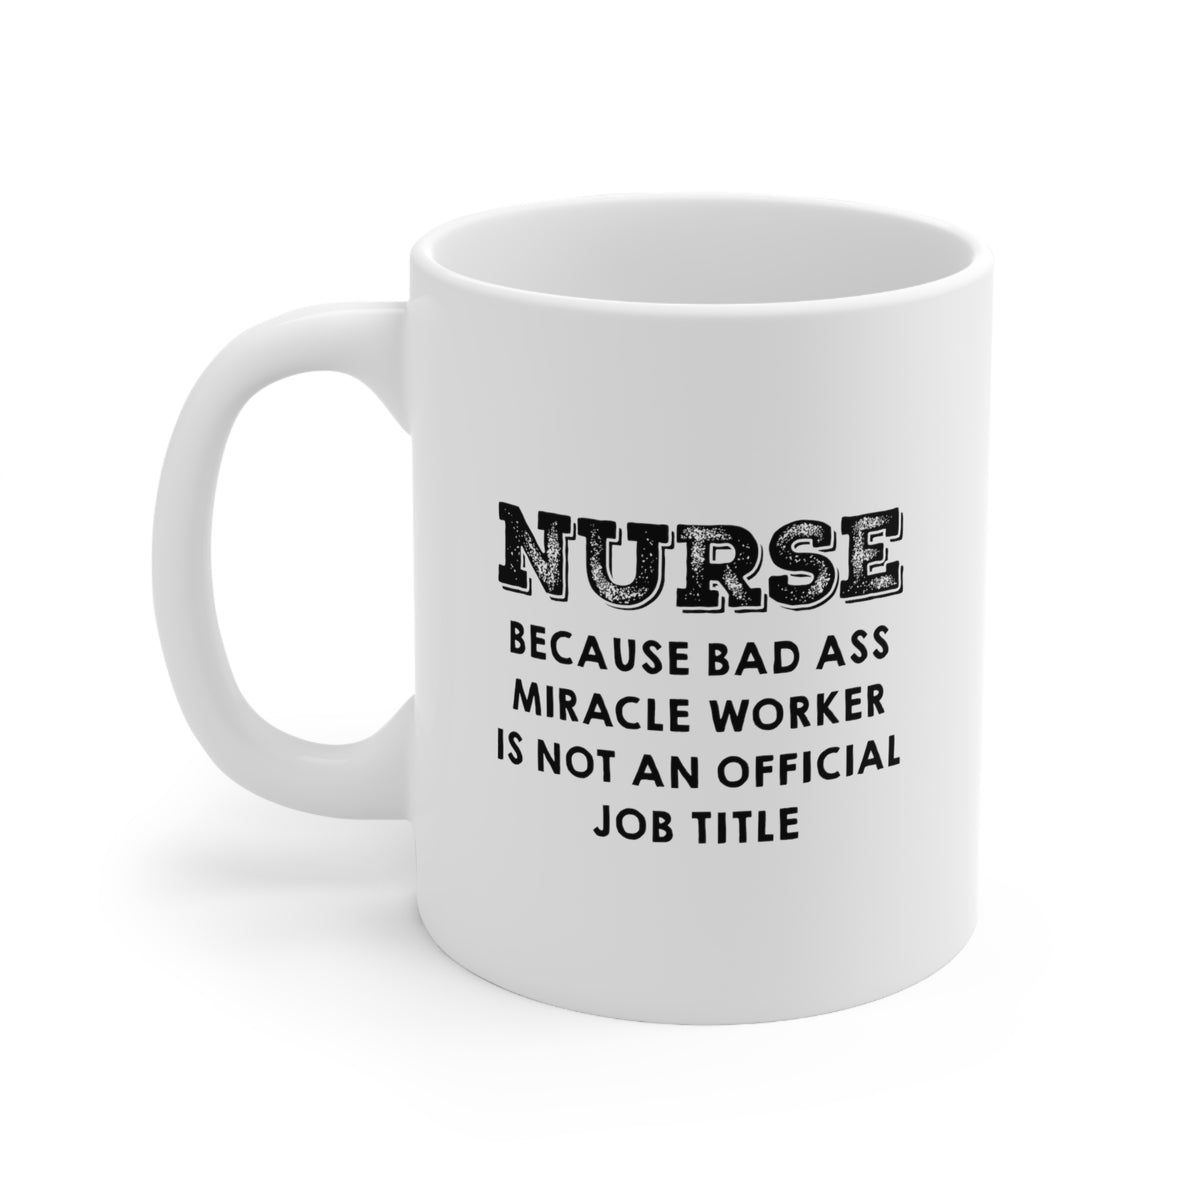 Funny Nurse Coffee Mug - Bad Ass Miracle Worker Cup - Fun Birthday Gifts For Practitioner Retirement Nursing Mom